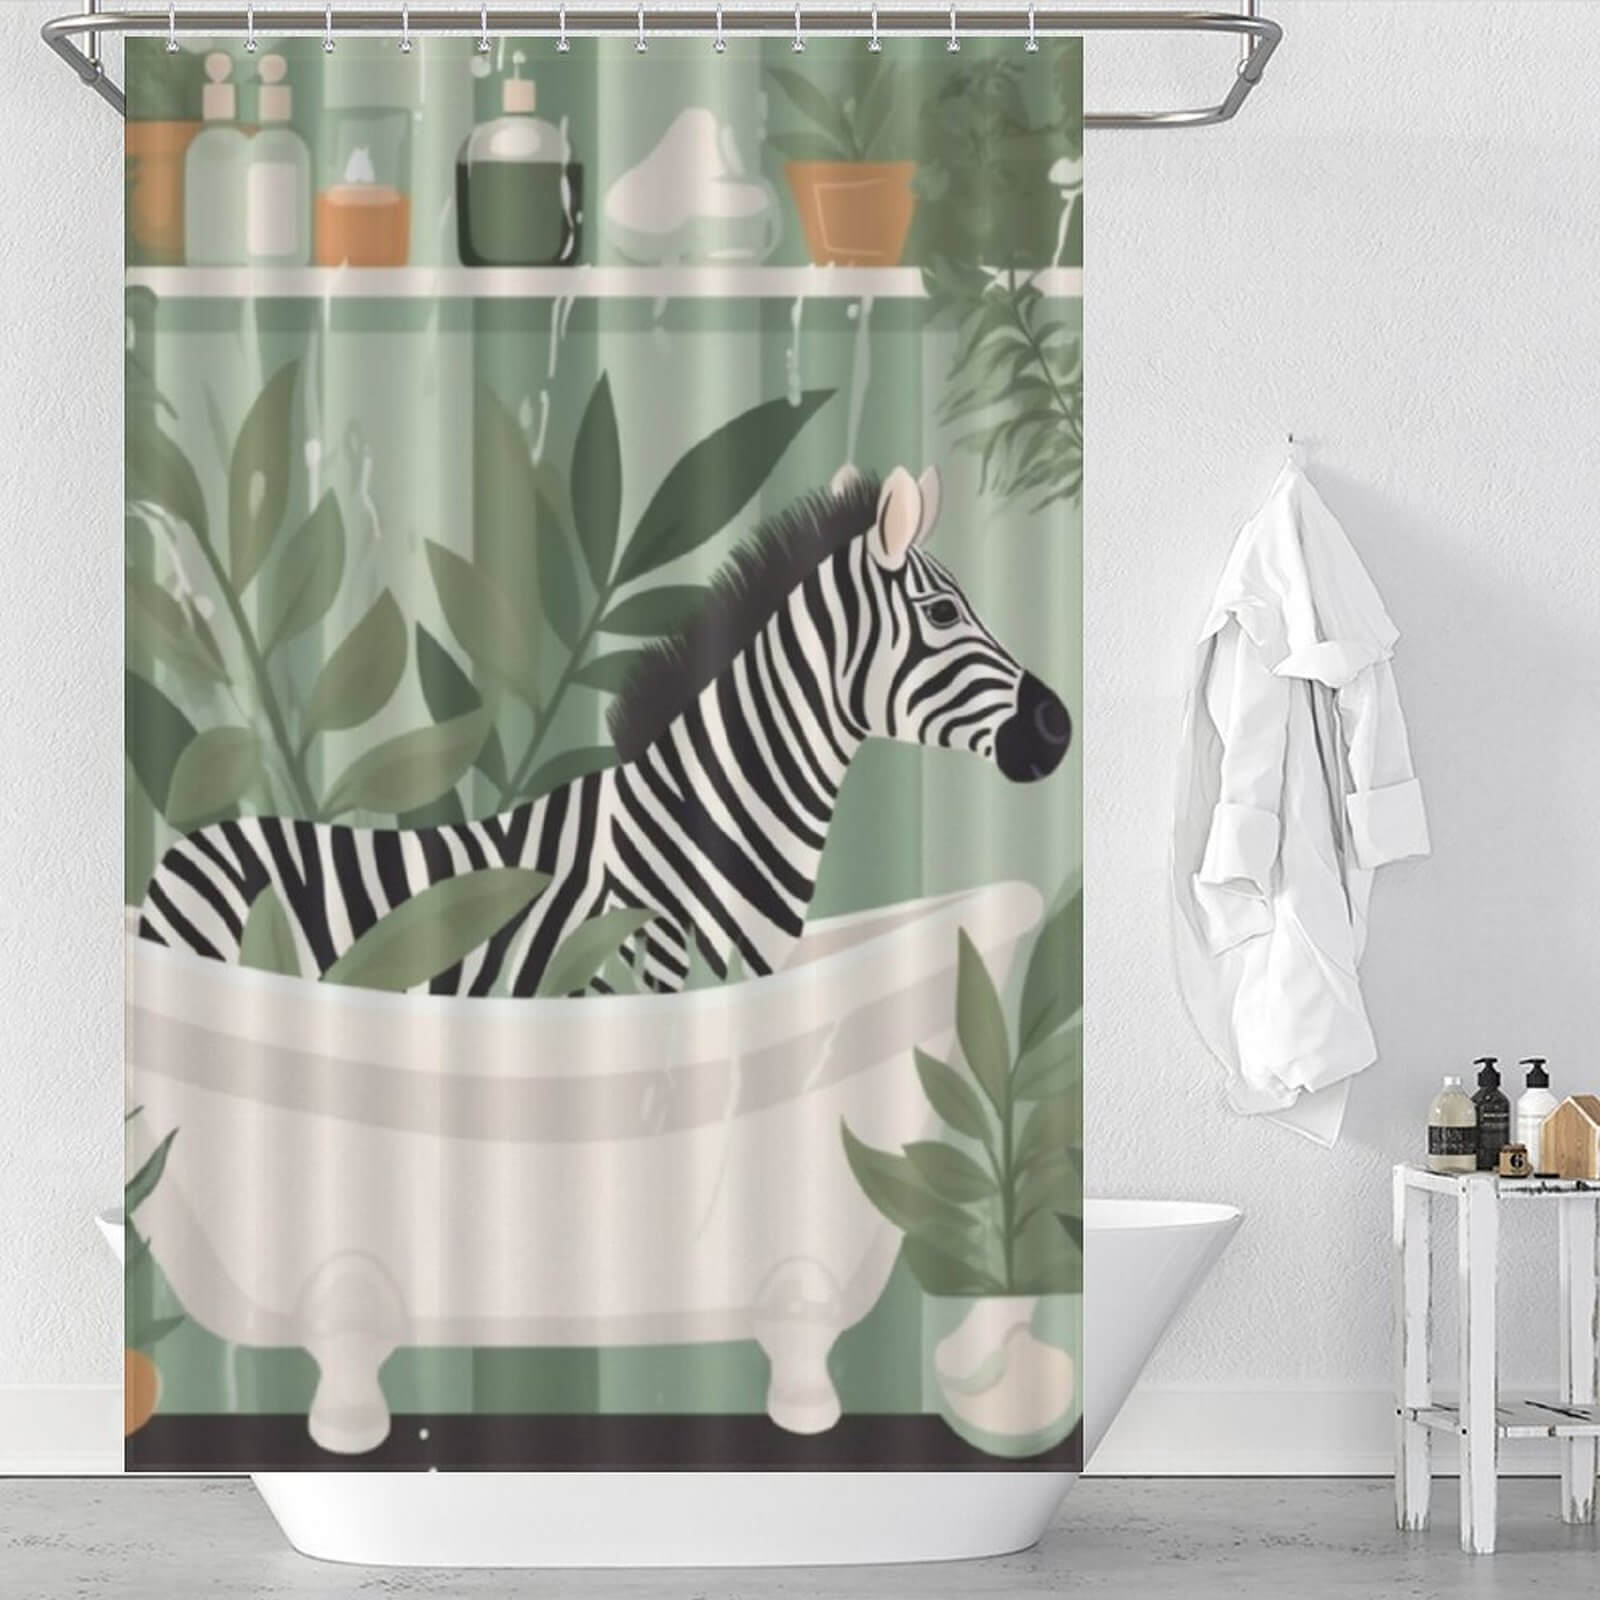 This Funny Zebra Shower Curtain by Cotton Cat features a zebra in a tub, adding a whimsical touch to your bathroom decor.